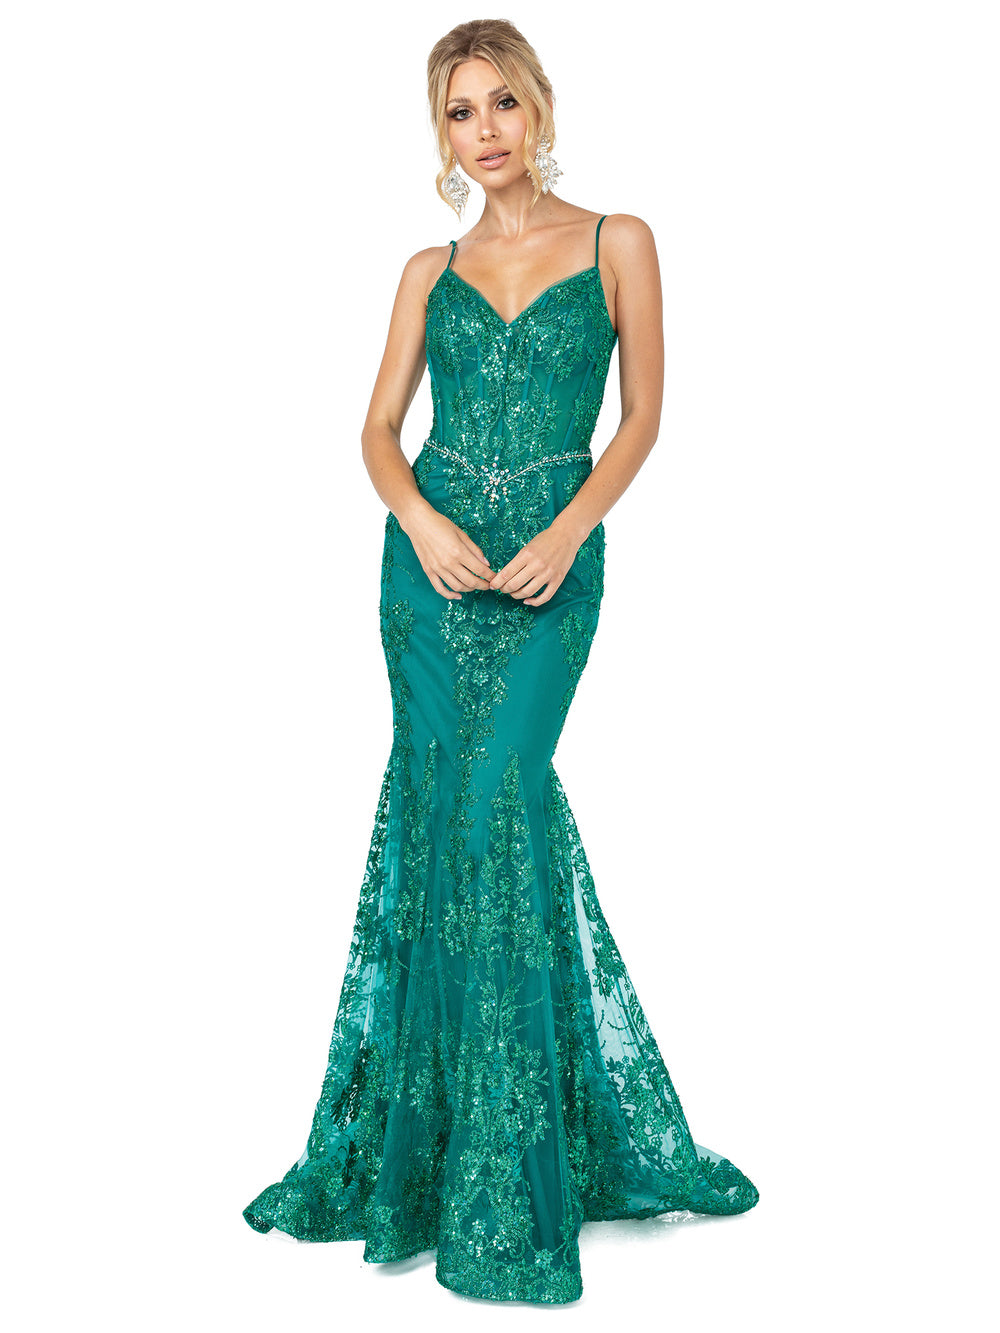 DQ 4118 is a Long fitted Sequin Mermaid Prom Dress & Pageant Gown. Featuring a V Neckline with a sheer bodice with boning & Crystal Belt. Mermaid Silhouette with sweeping train. Available Sizes: XS-3XL  Available Colors: Black, Fuchsia, Gold, Hunter Green, Light Teal, Lilac, Magenta, Mocha, Navy, Rose Gold, Green, Royal Blue, Steel Blue